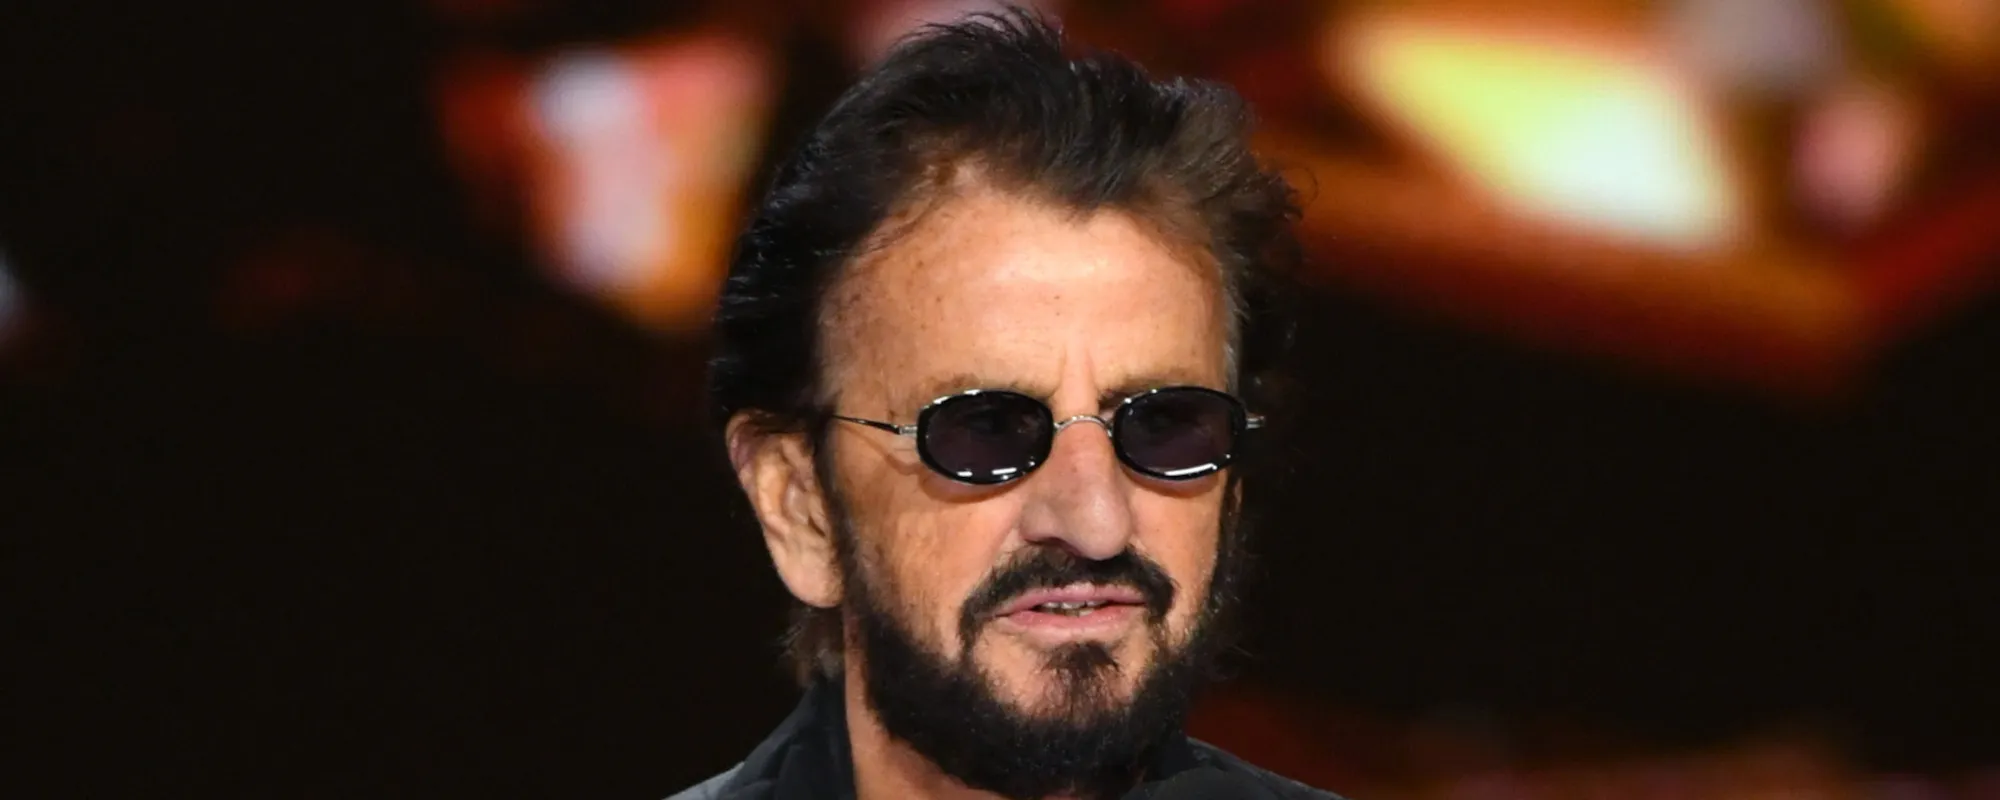 Ringo Starr at 80: From Liverpool's Streets to $350 Million Net Worth – Inside the Journey of The Beatles' Drummer